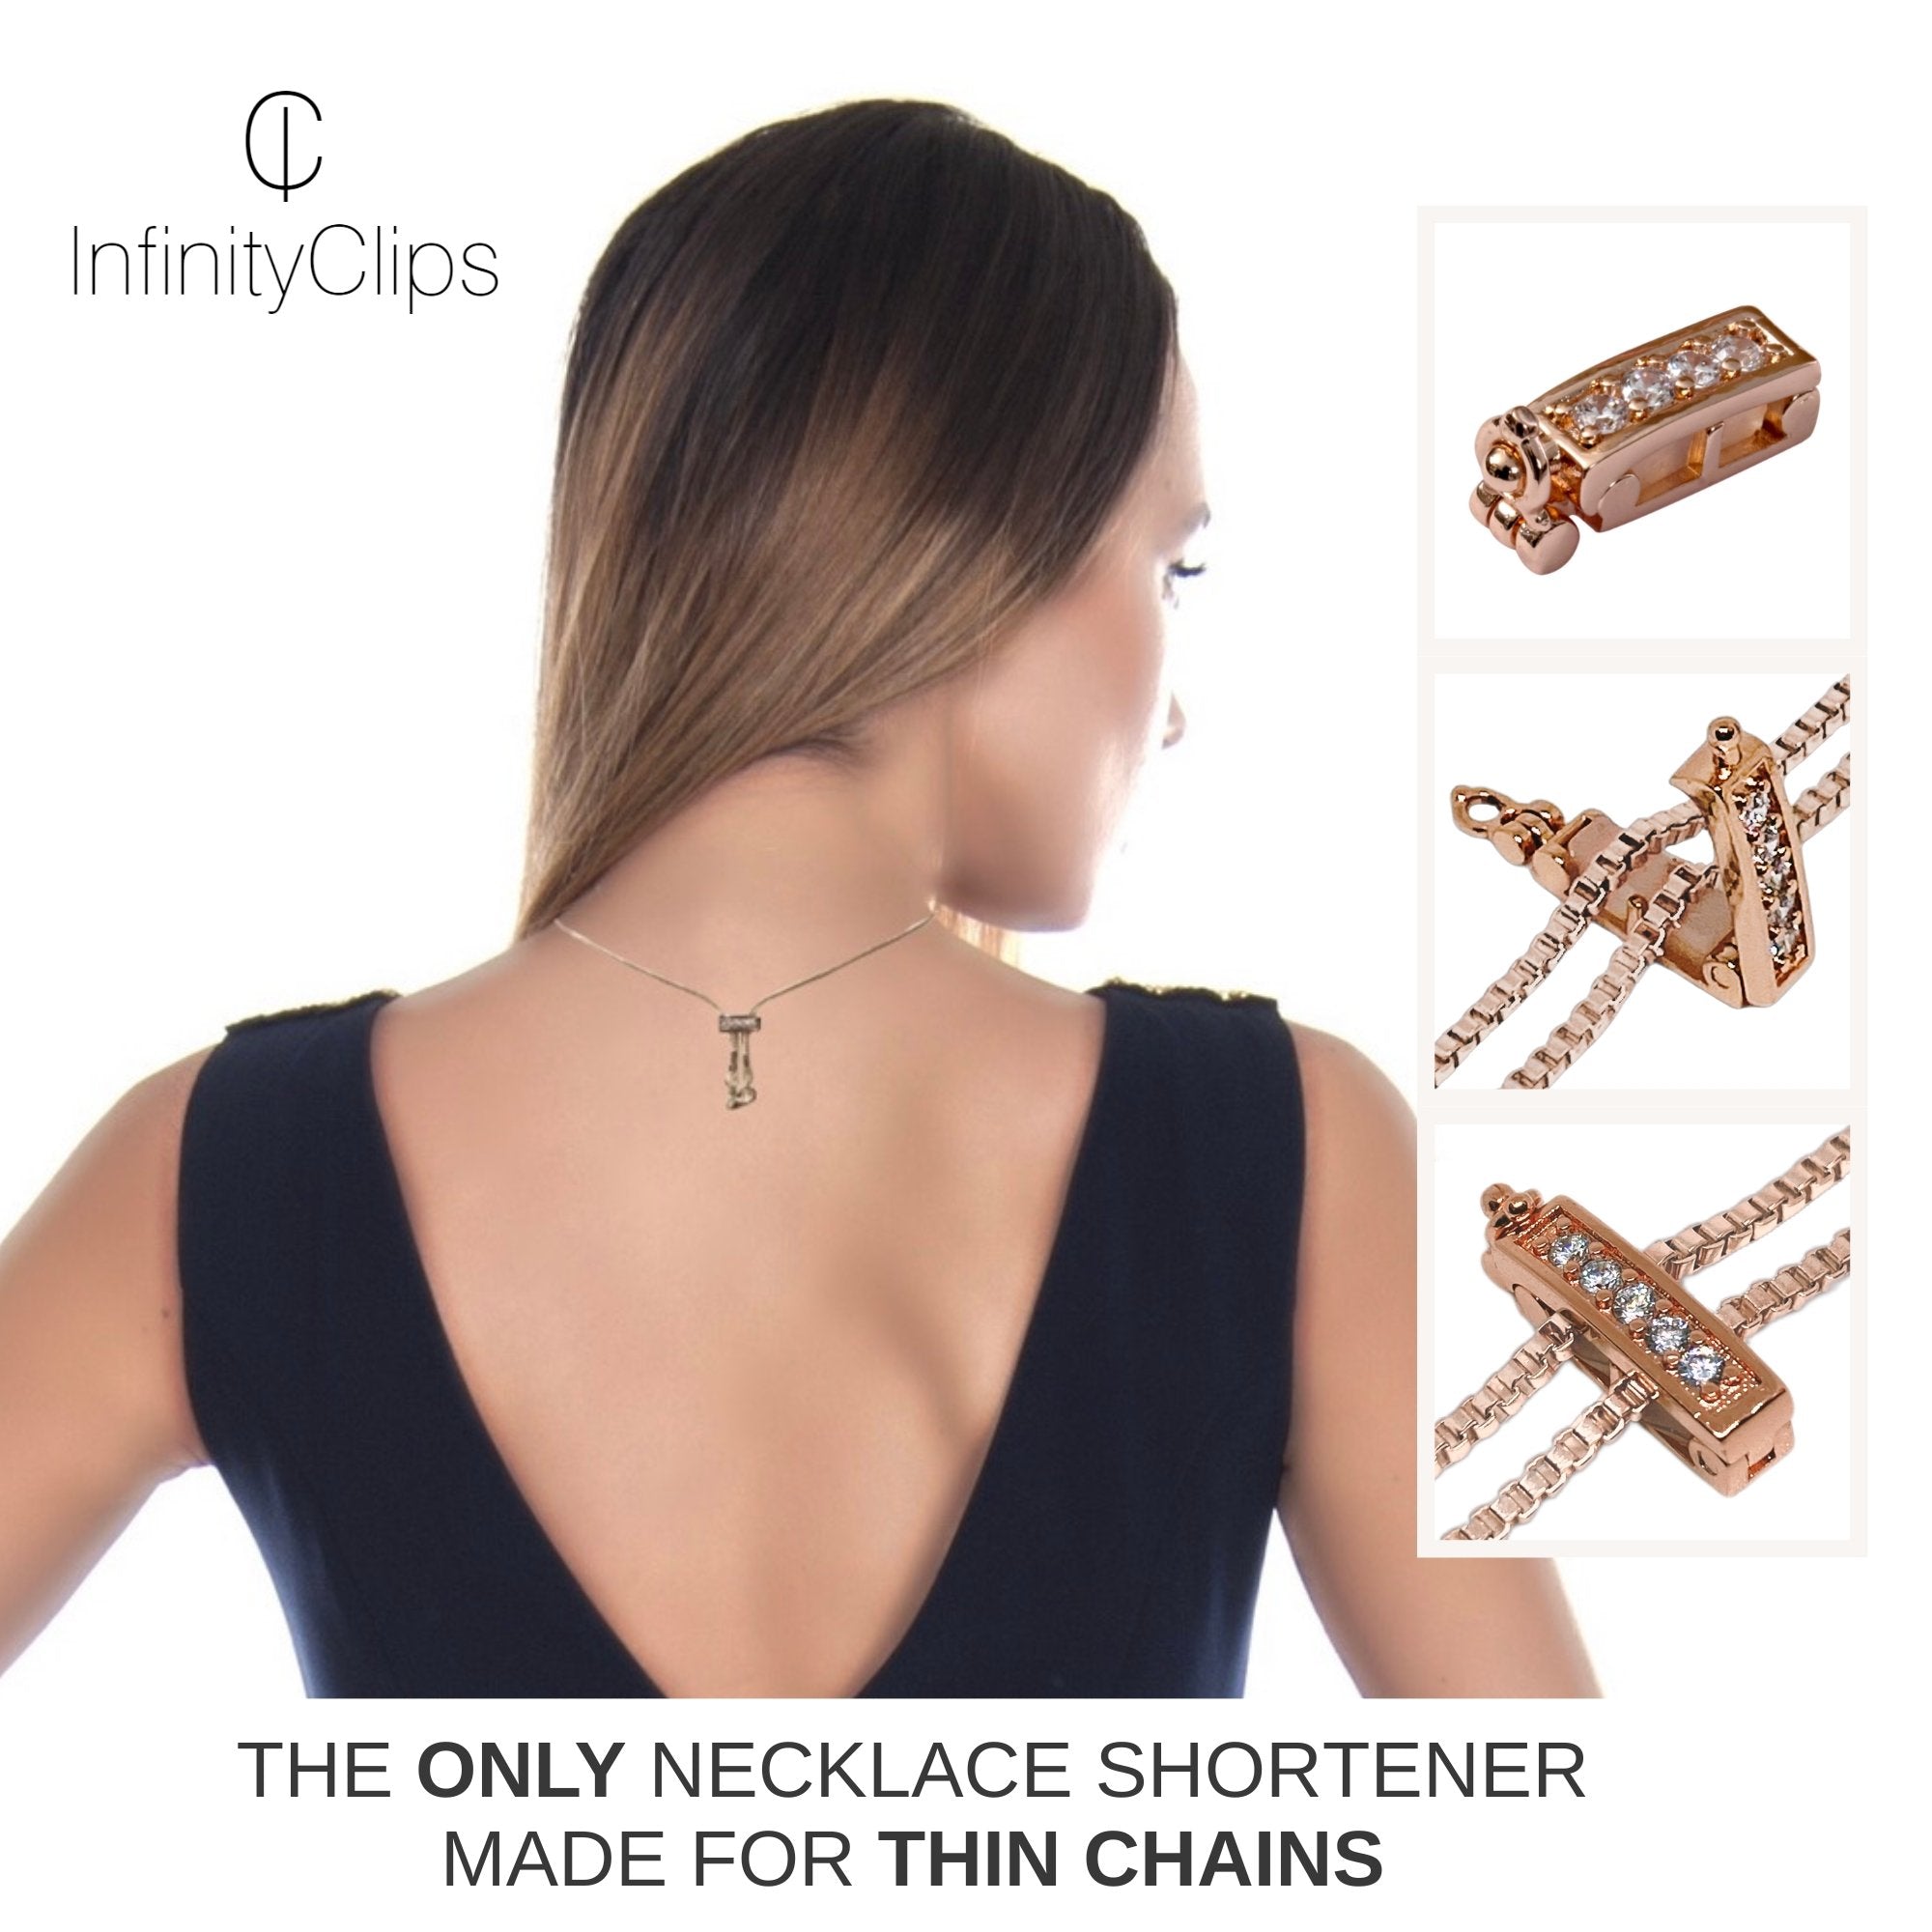 Infinity Clips 3 Piece Small Classic Necklace Shortener Set With Safety  Clasp, Chain Shortener, Clasp for Necklace silver/gold/rose Gold 